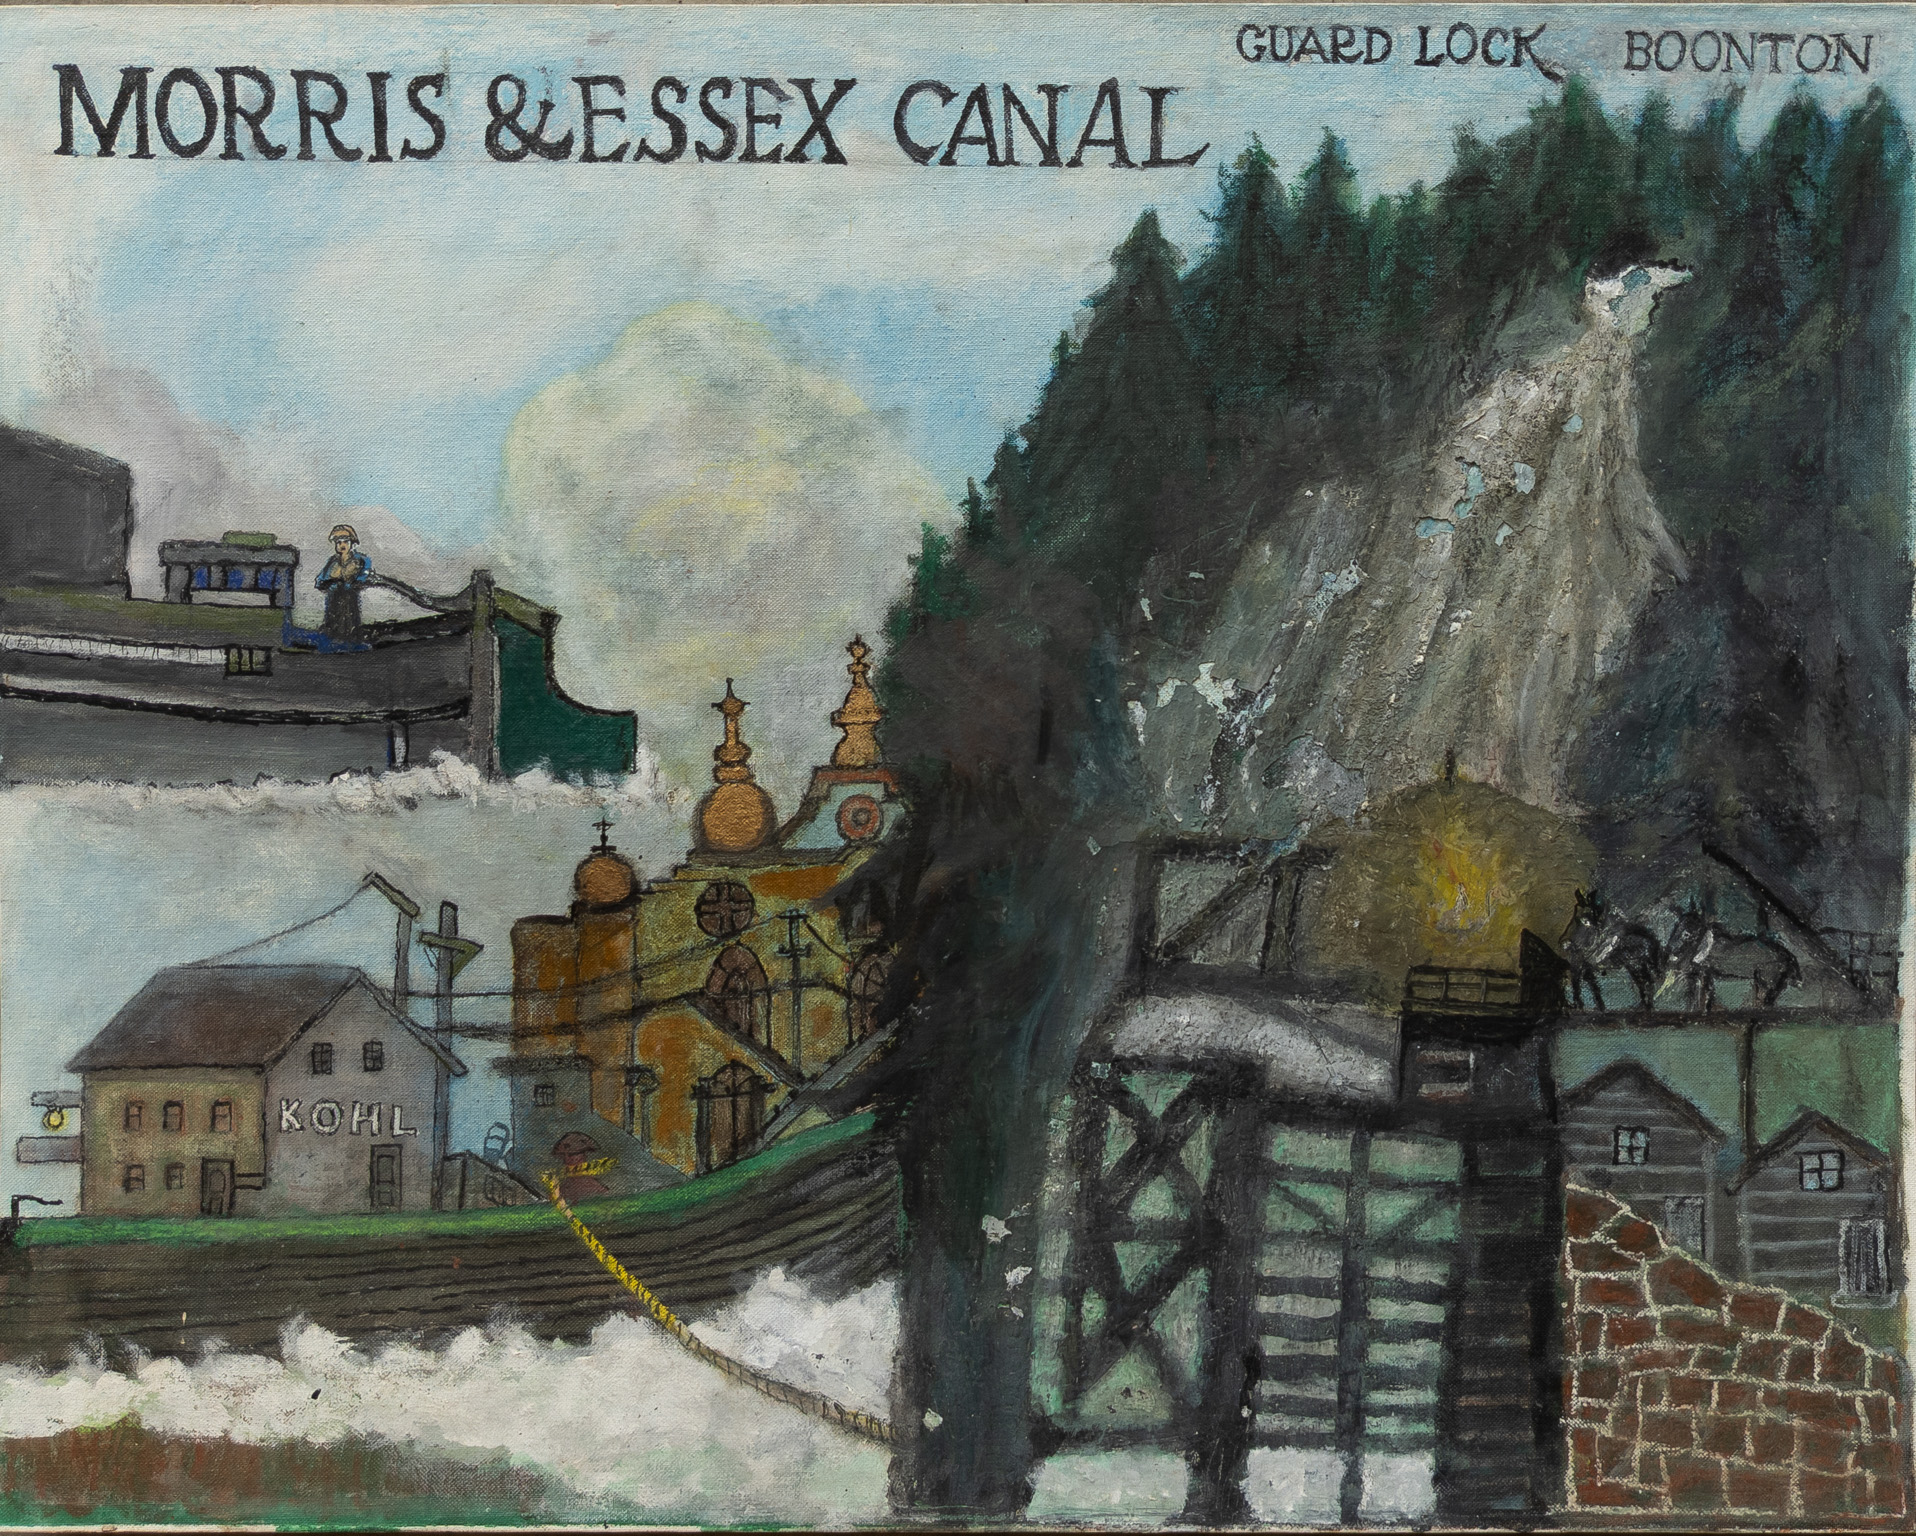 "Guard Lock, Boonton". Painting by F.C. Wells, Jr. Likely in the 1940 or '50s.